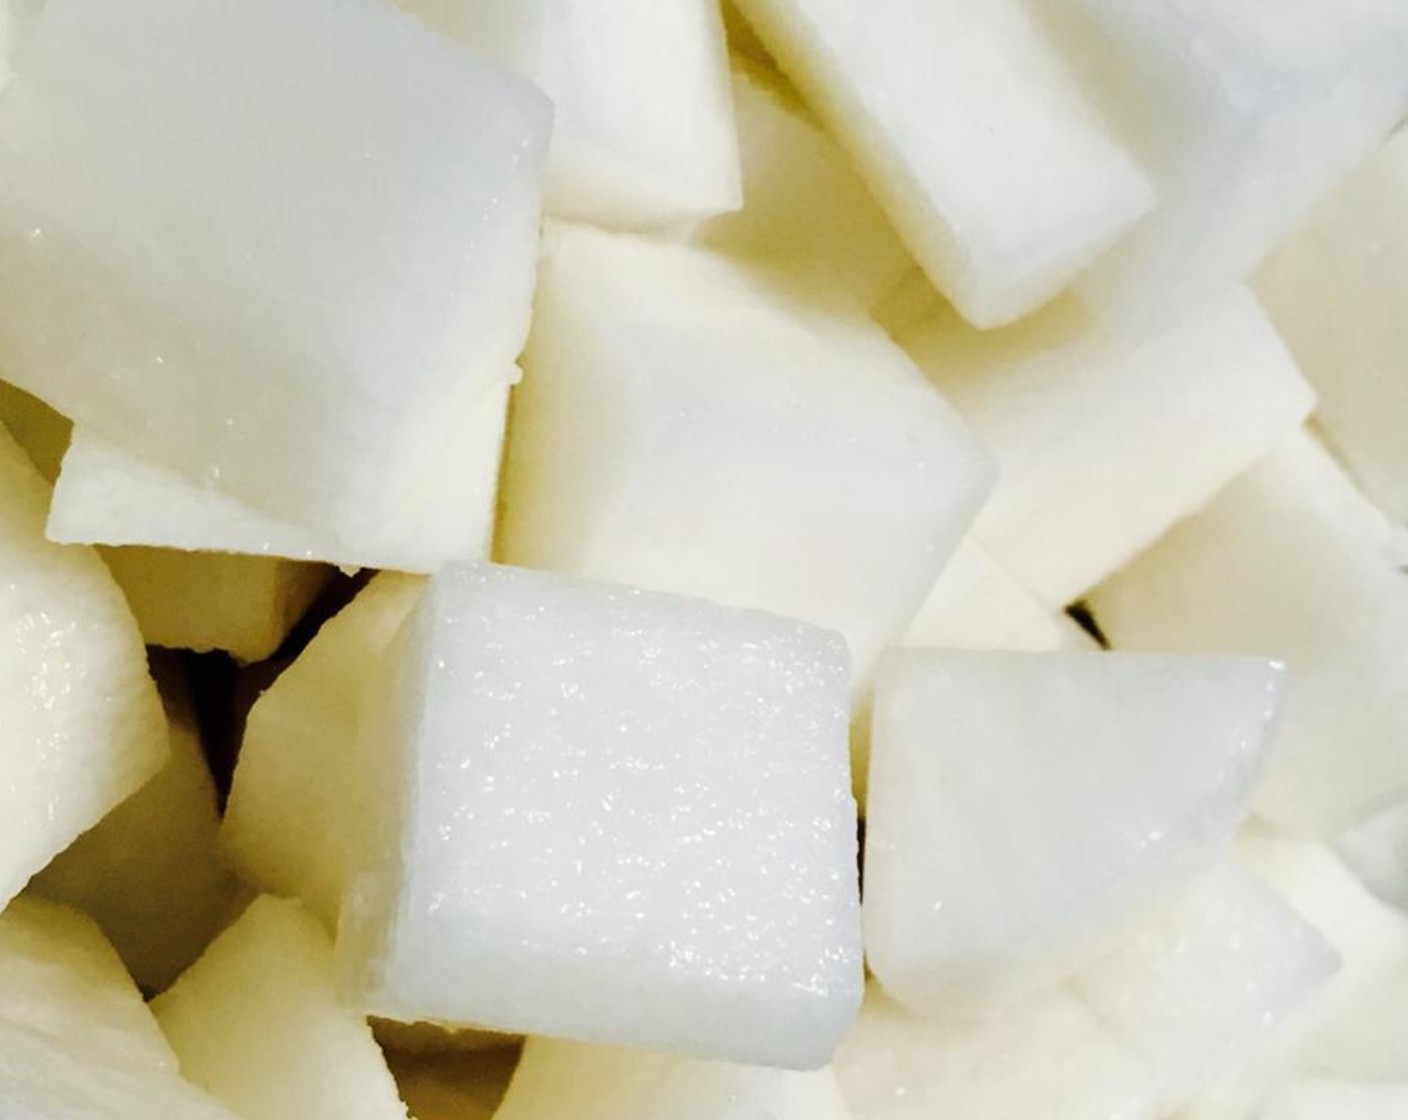 step 2 Put the white radish cubes in a bowl or strainer and toss with the Salt (1 Tbsp). Allow 30 minutes for the salt to draw out the water. Make sure water has been removed.